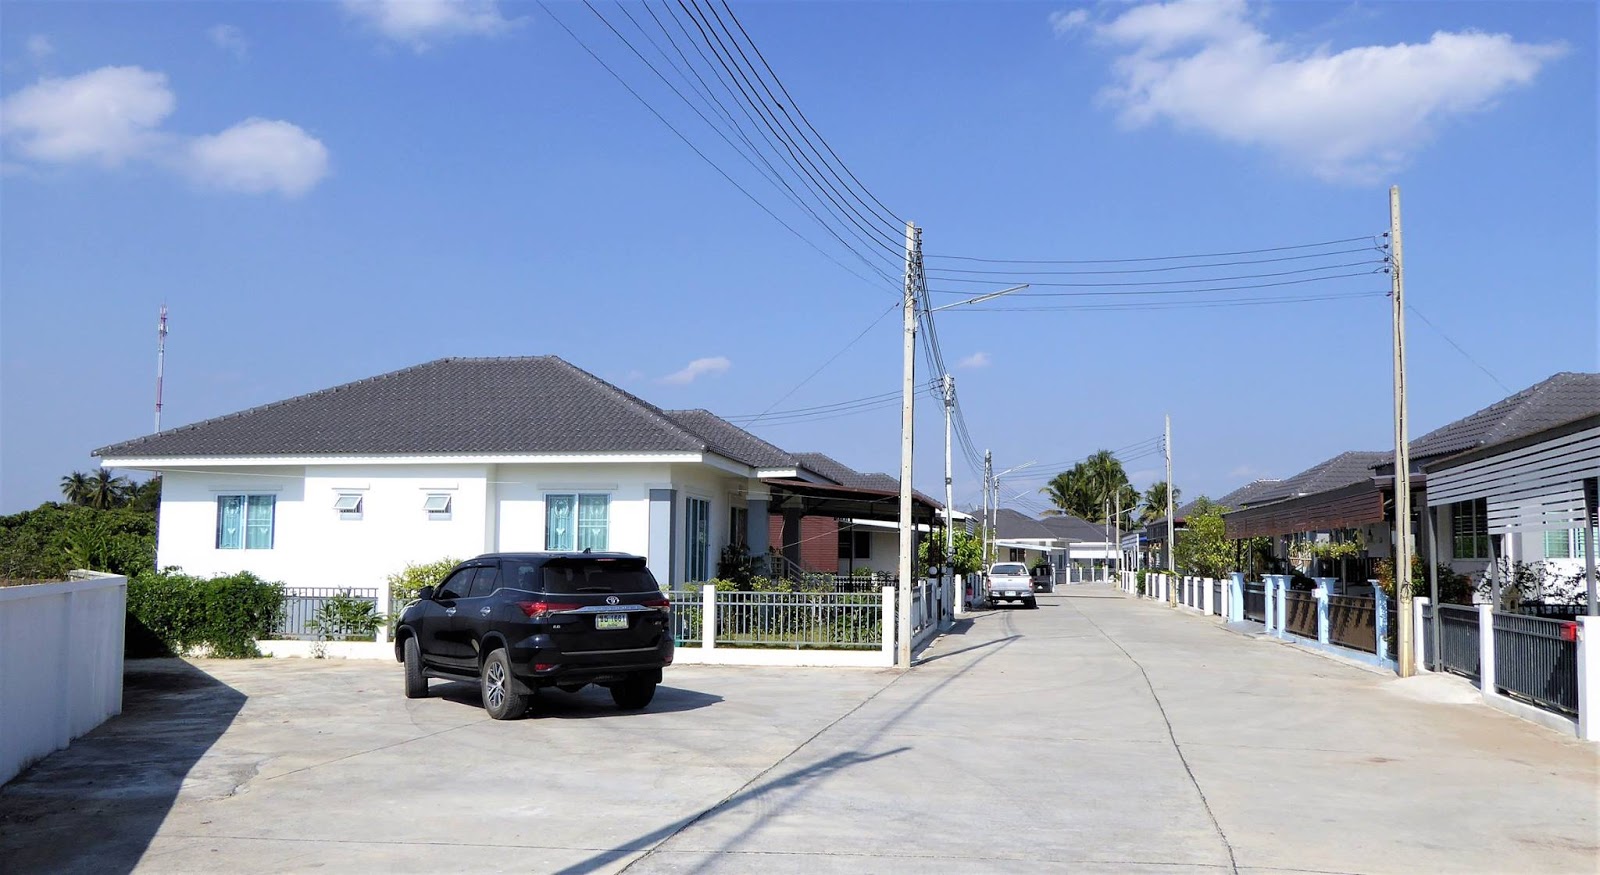 These three bungalow house plan consists of 1-3 bedrooms, 1-2 bathroom, kitchen, a living room and a terrace outside. With a living area of approximately under 115 square meters in construction costs more than 670,000 baht (19,400 USD)